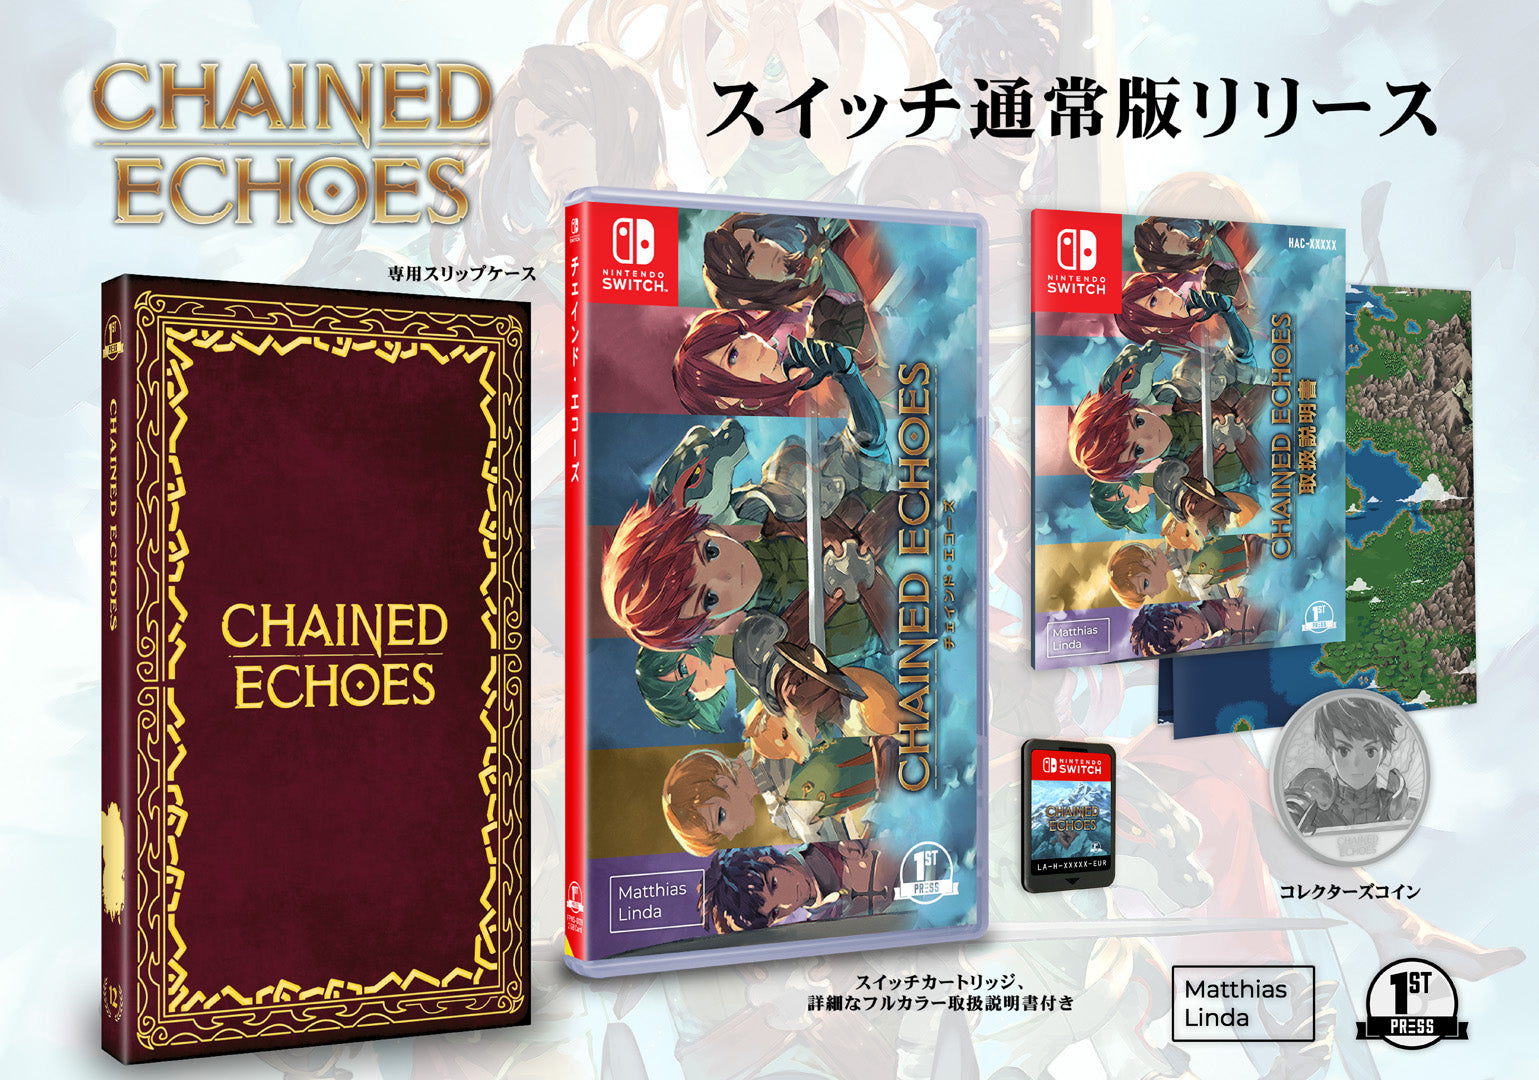 Similar Games To Play Like Chained Echoes